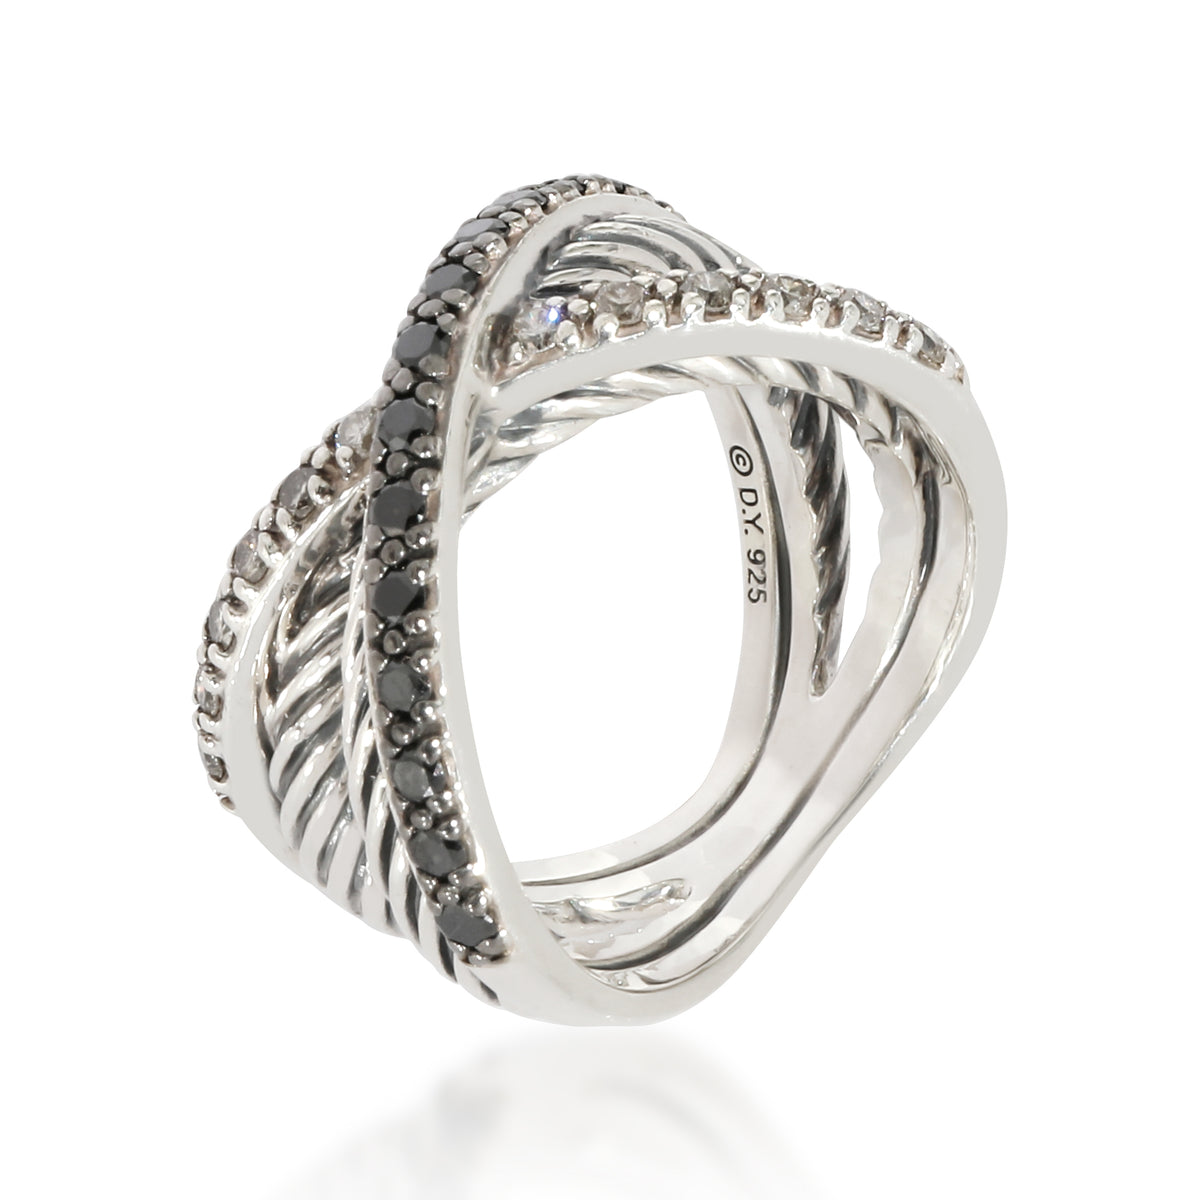 David Yurman Cable X Crossover Diamond Ring in Sterling Silver 0.4 CTW